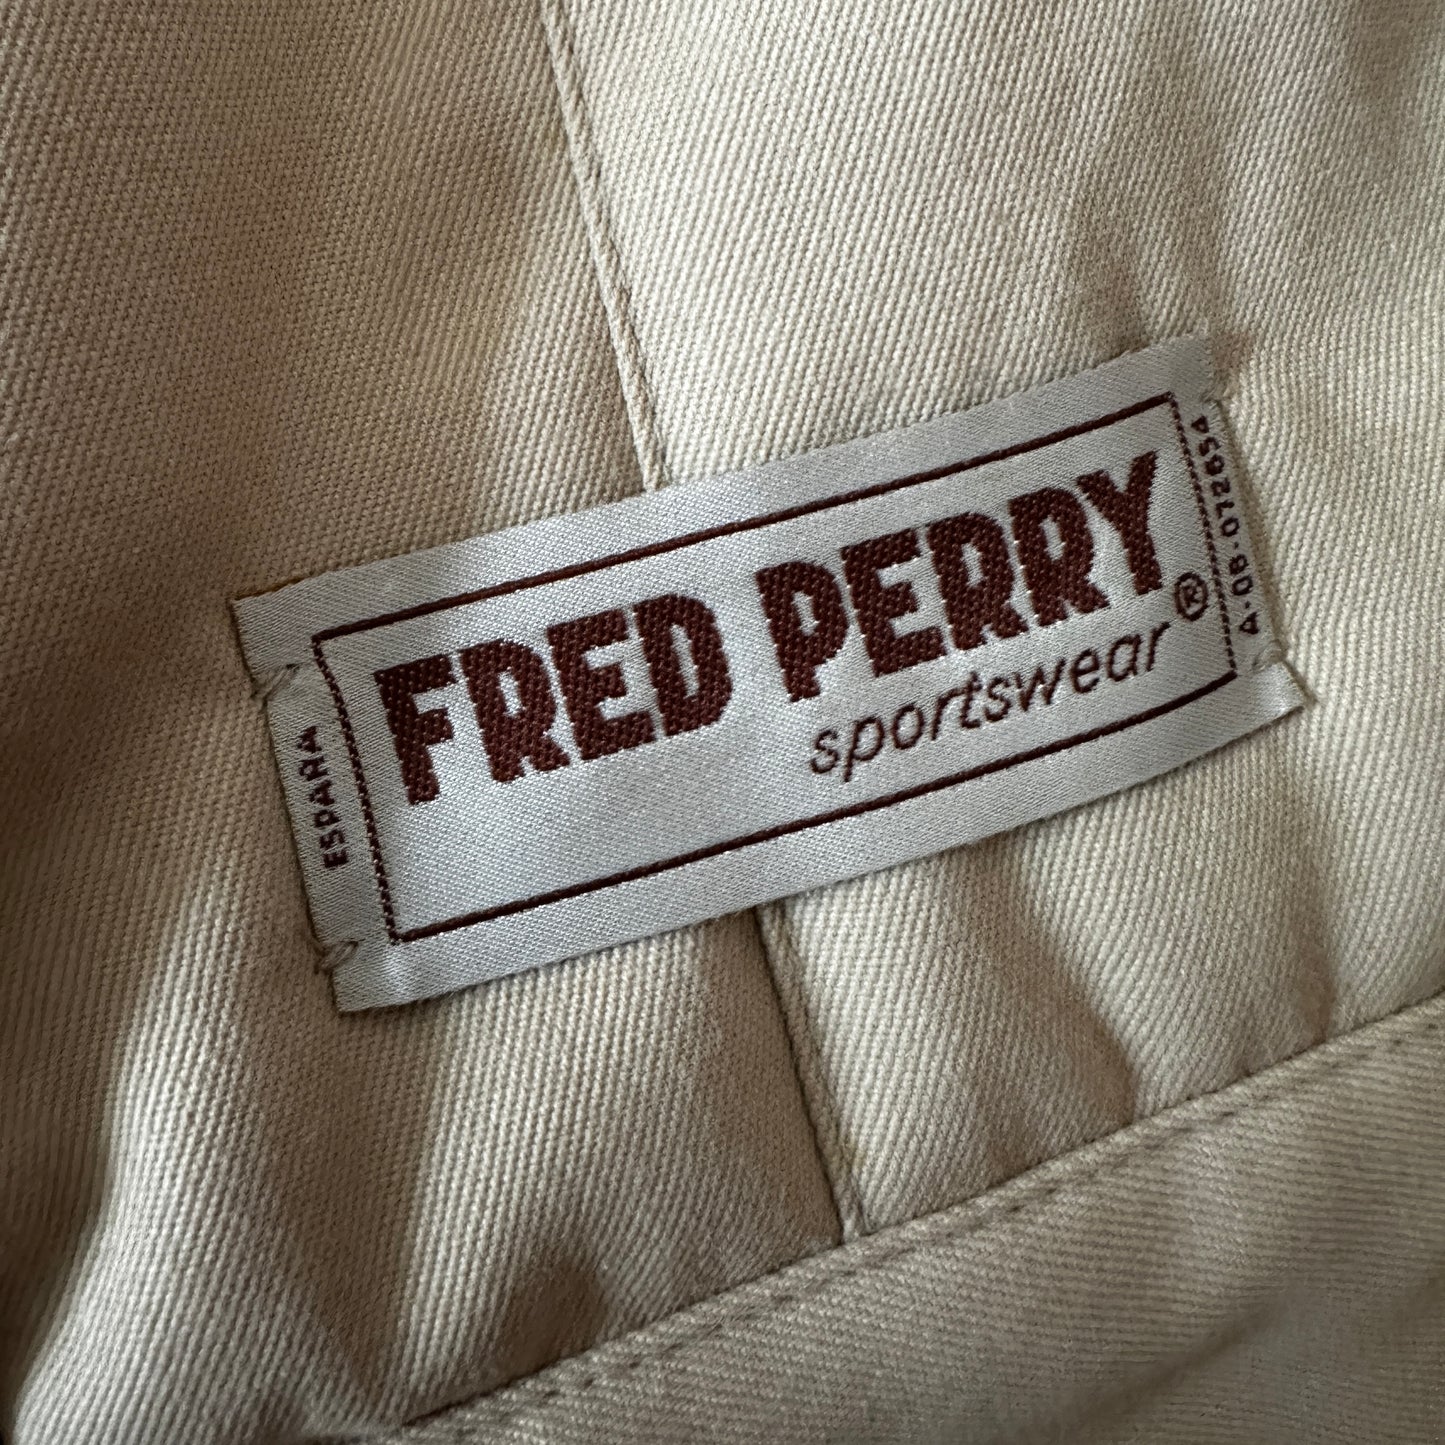 Fred Perry Vintage 80s Anorak Brown-beige - Deadstock - 56 / XL - Made in Spain